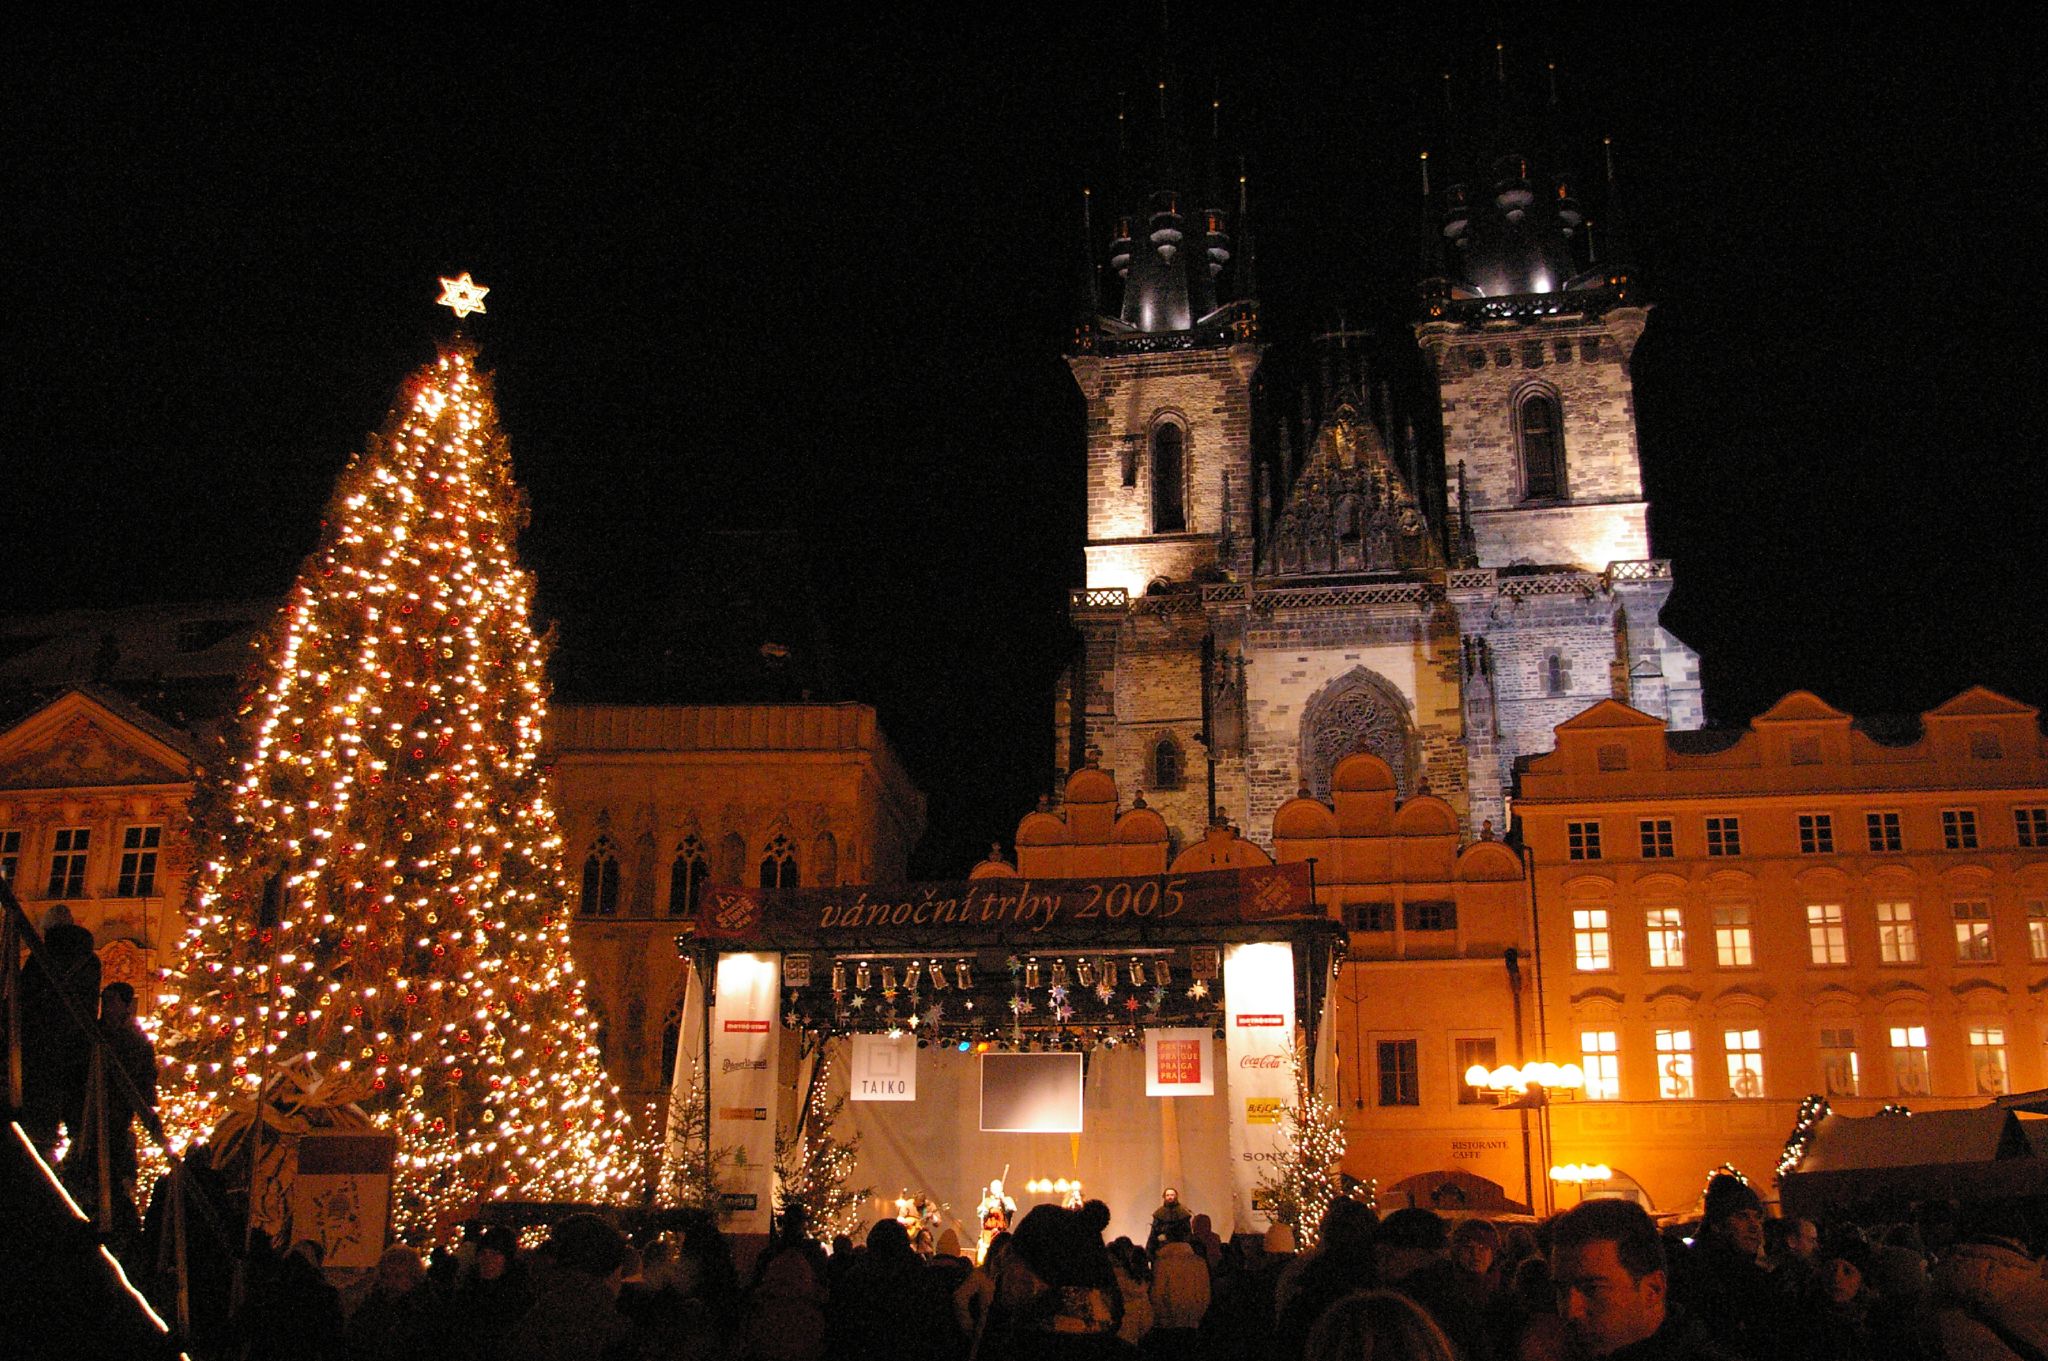 people standing around an illuminated christmas tree and castle